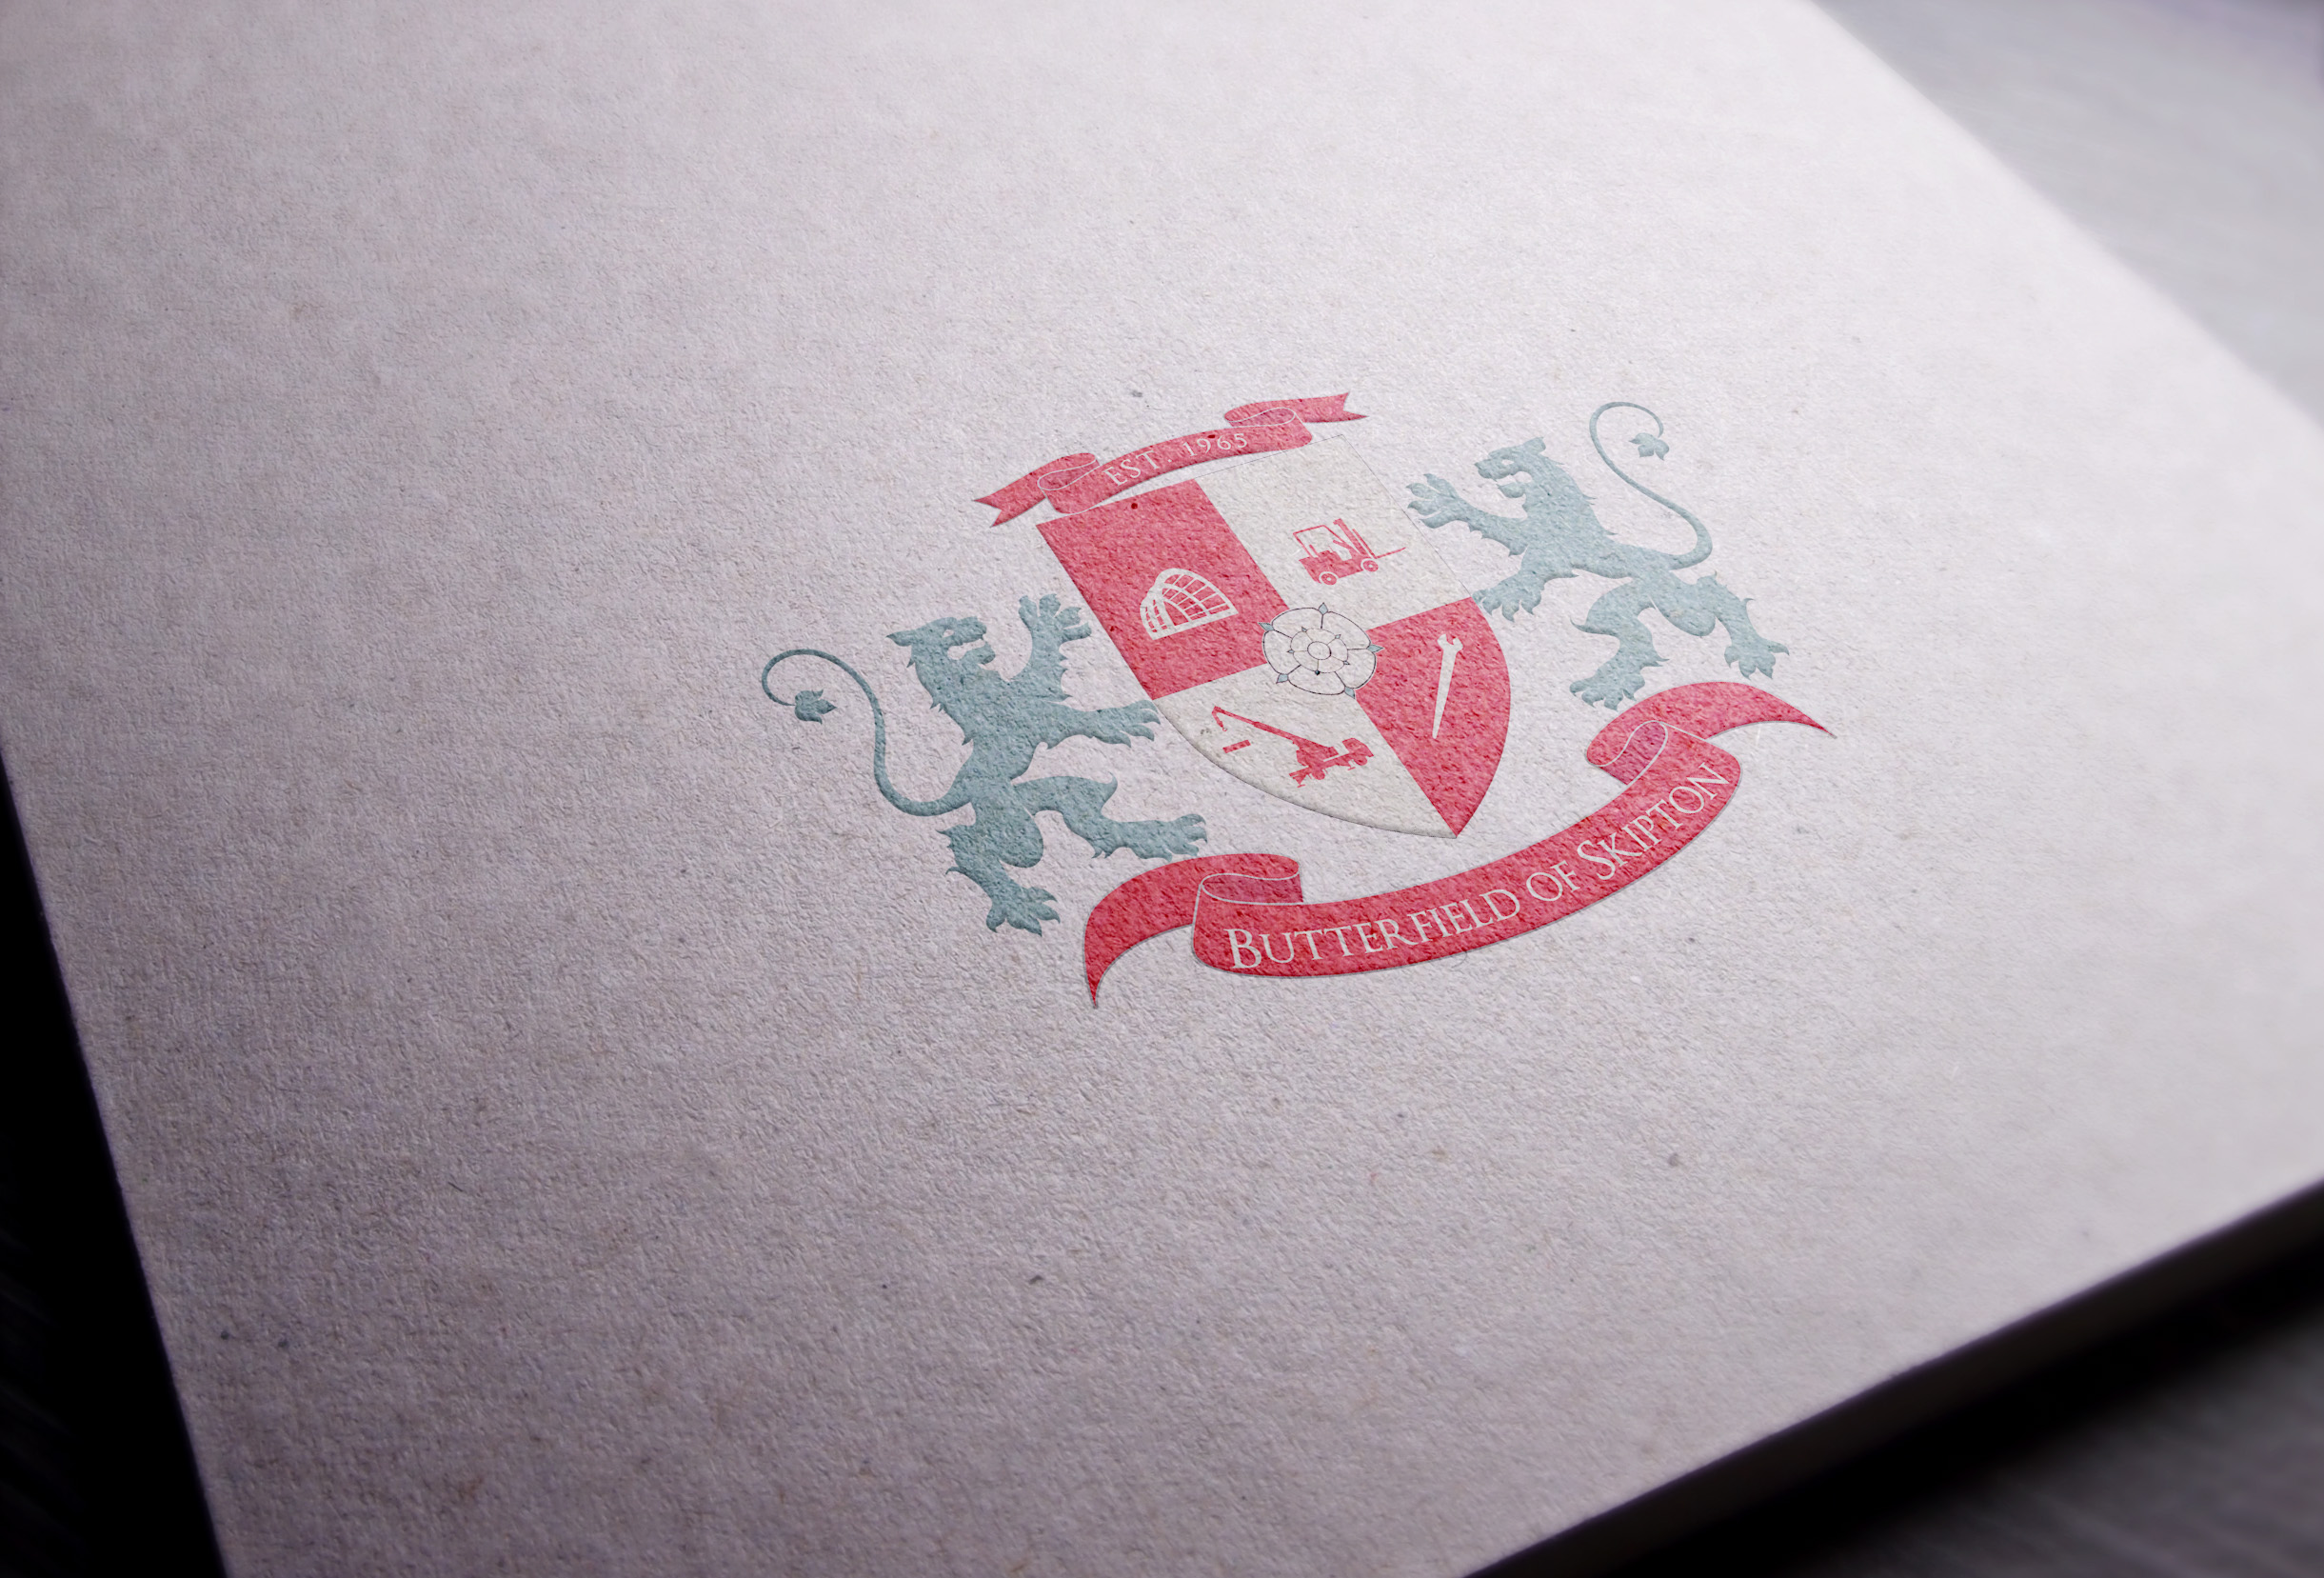 Coat of arms created for the Butterfield of Skipton, English heavy industry company.